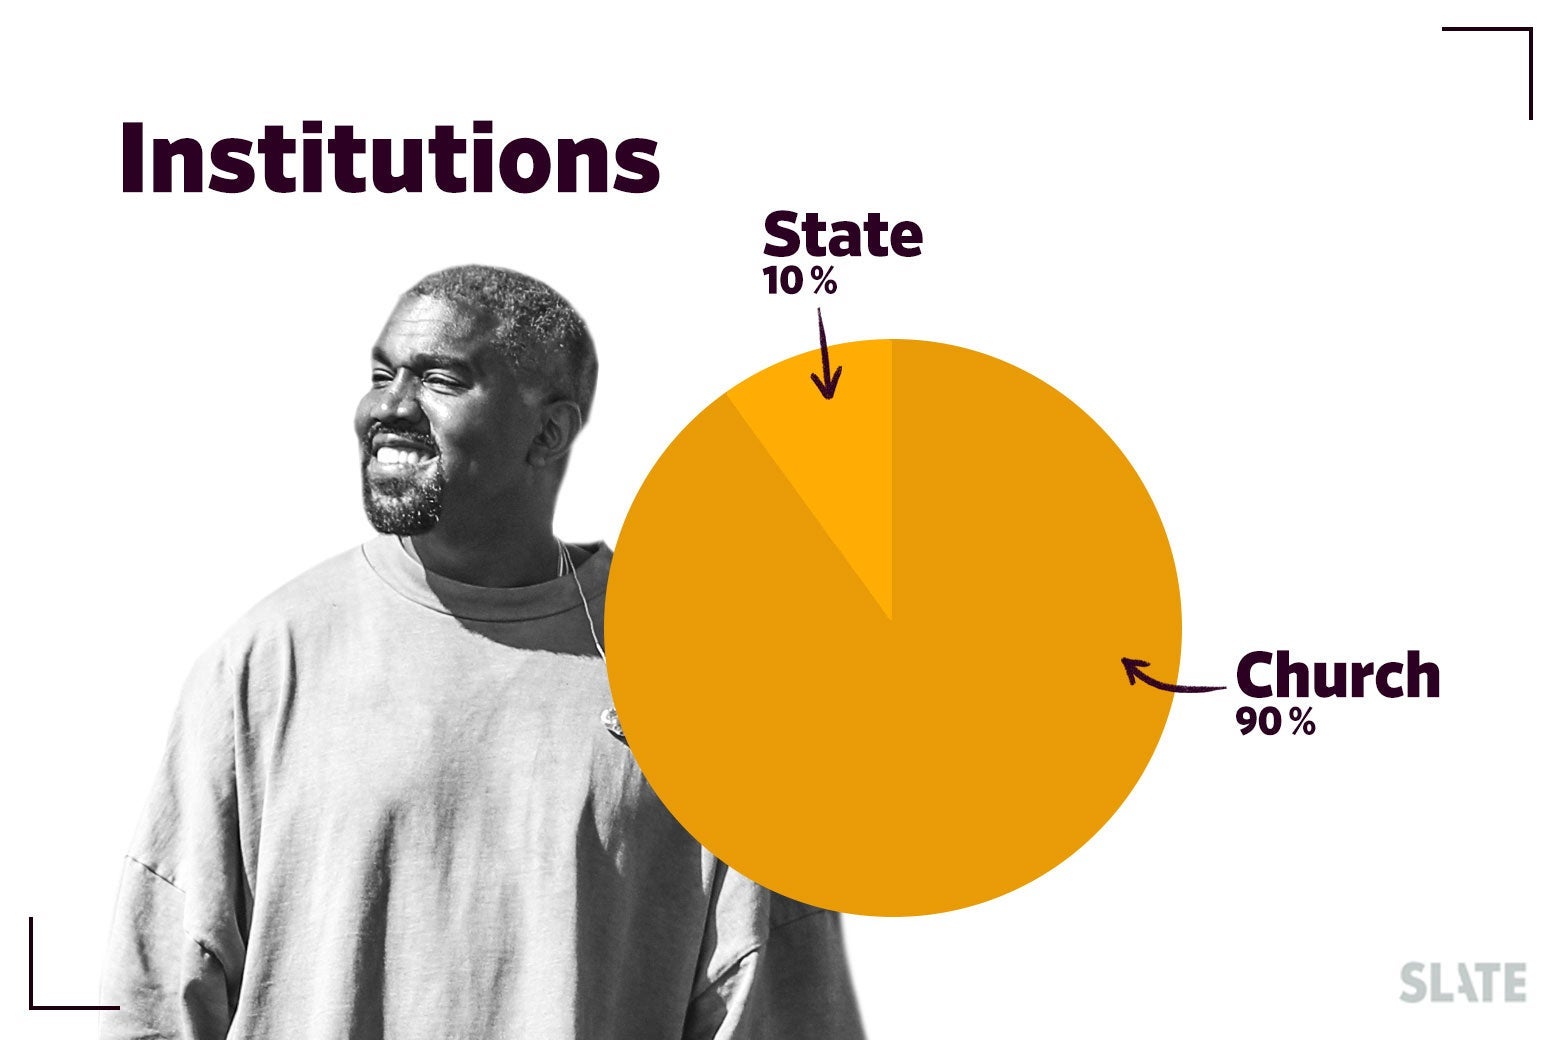 Kanye West and a pie chart noting "Church" versus "State" references.